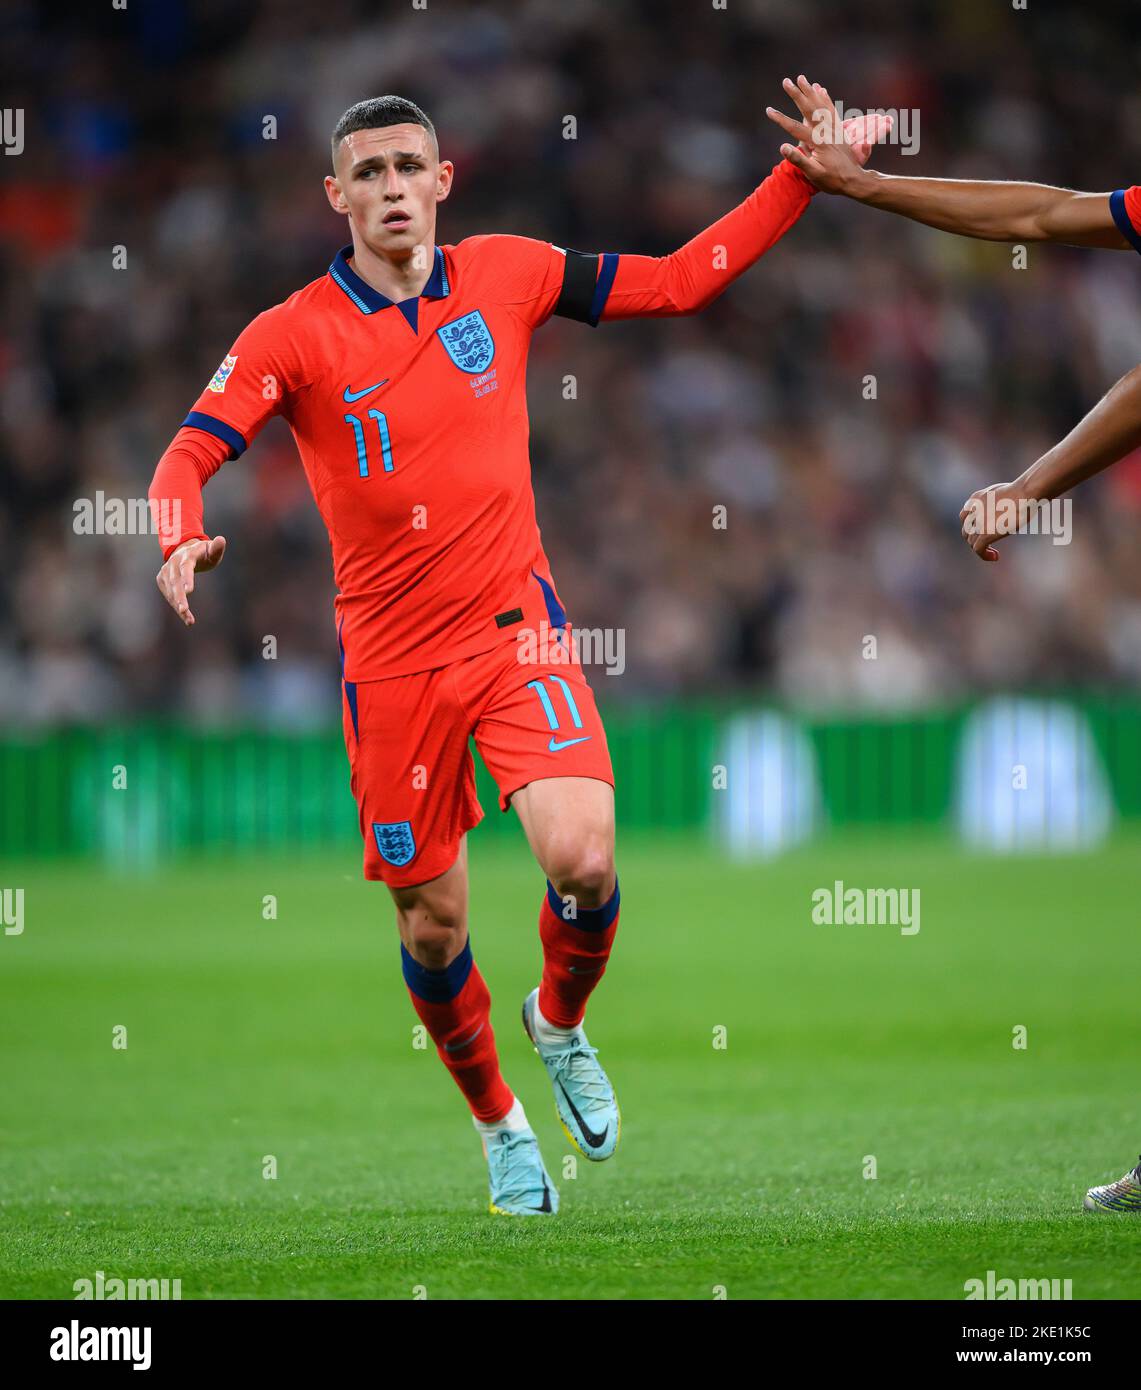 26 Sep 2022 - England v Germany - UEFA Nations League - League A - Group 3 - Wembley Stadium  England's Phil Foden high fives with Jude Bellingham during the UEFA Nations League match against Germany. Picture : Mark Pain / Alamy Live News Stock Photo